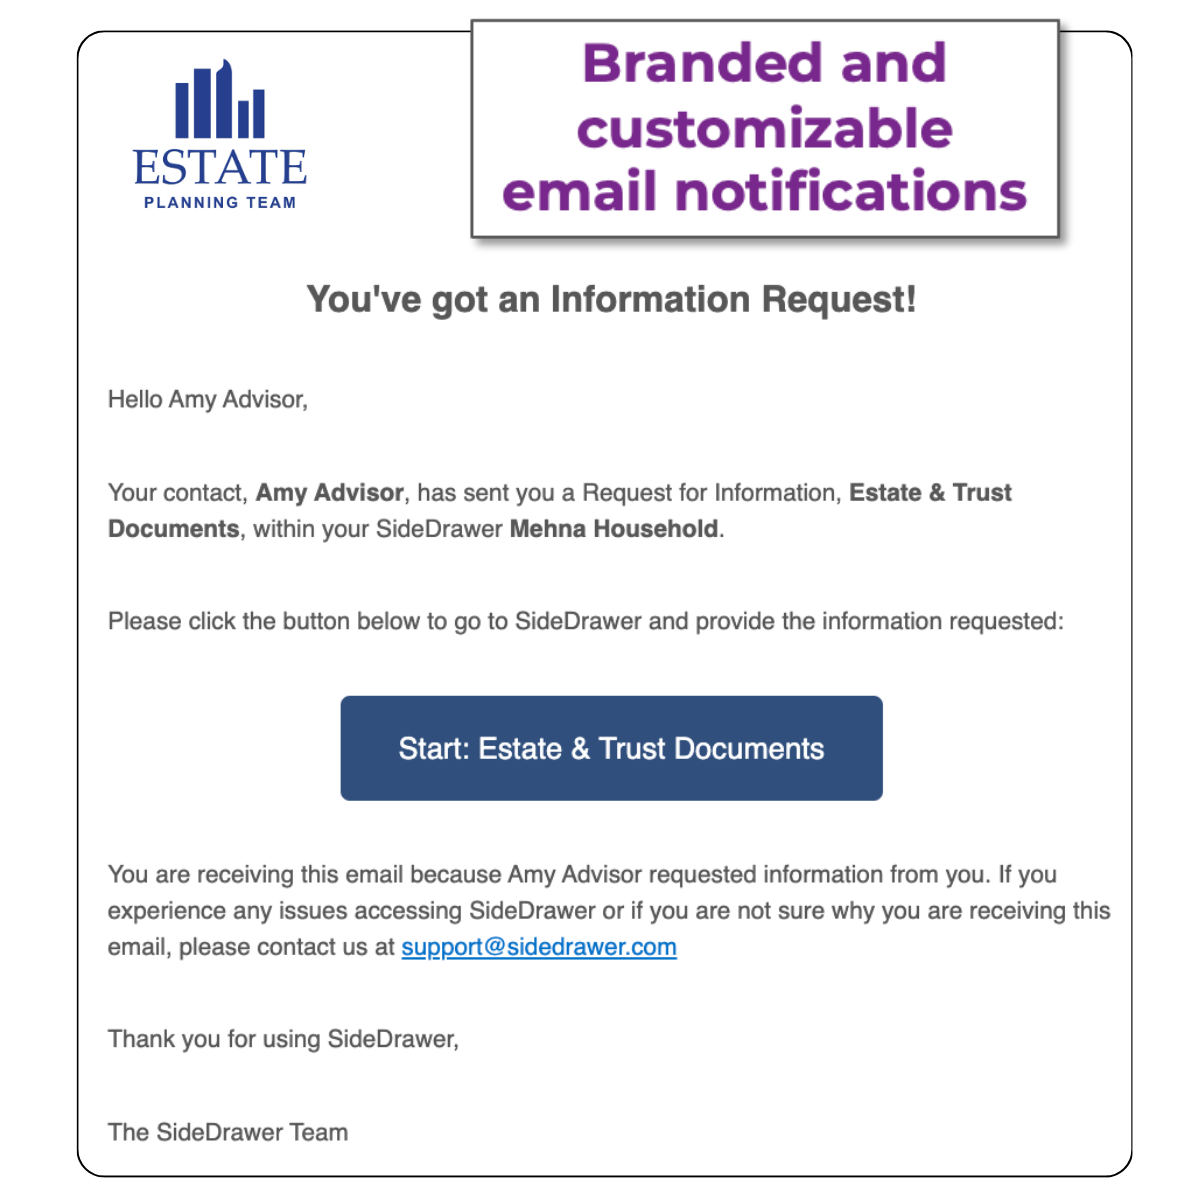 Branded and customizable email notifications